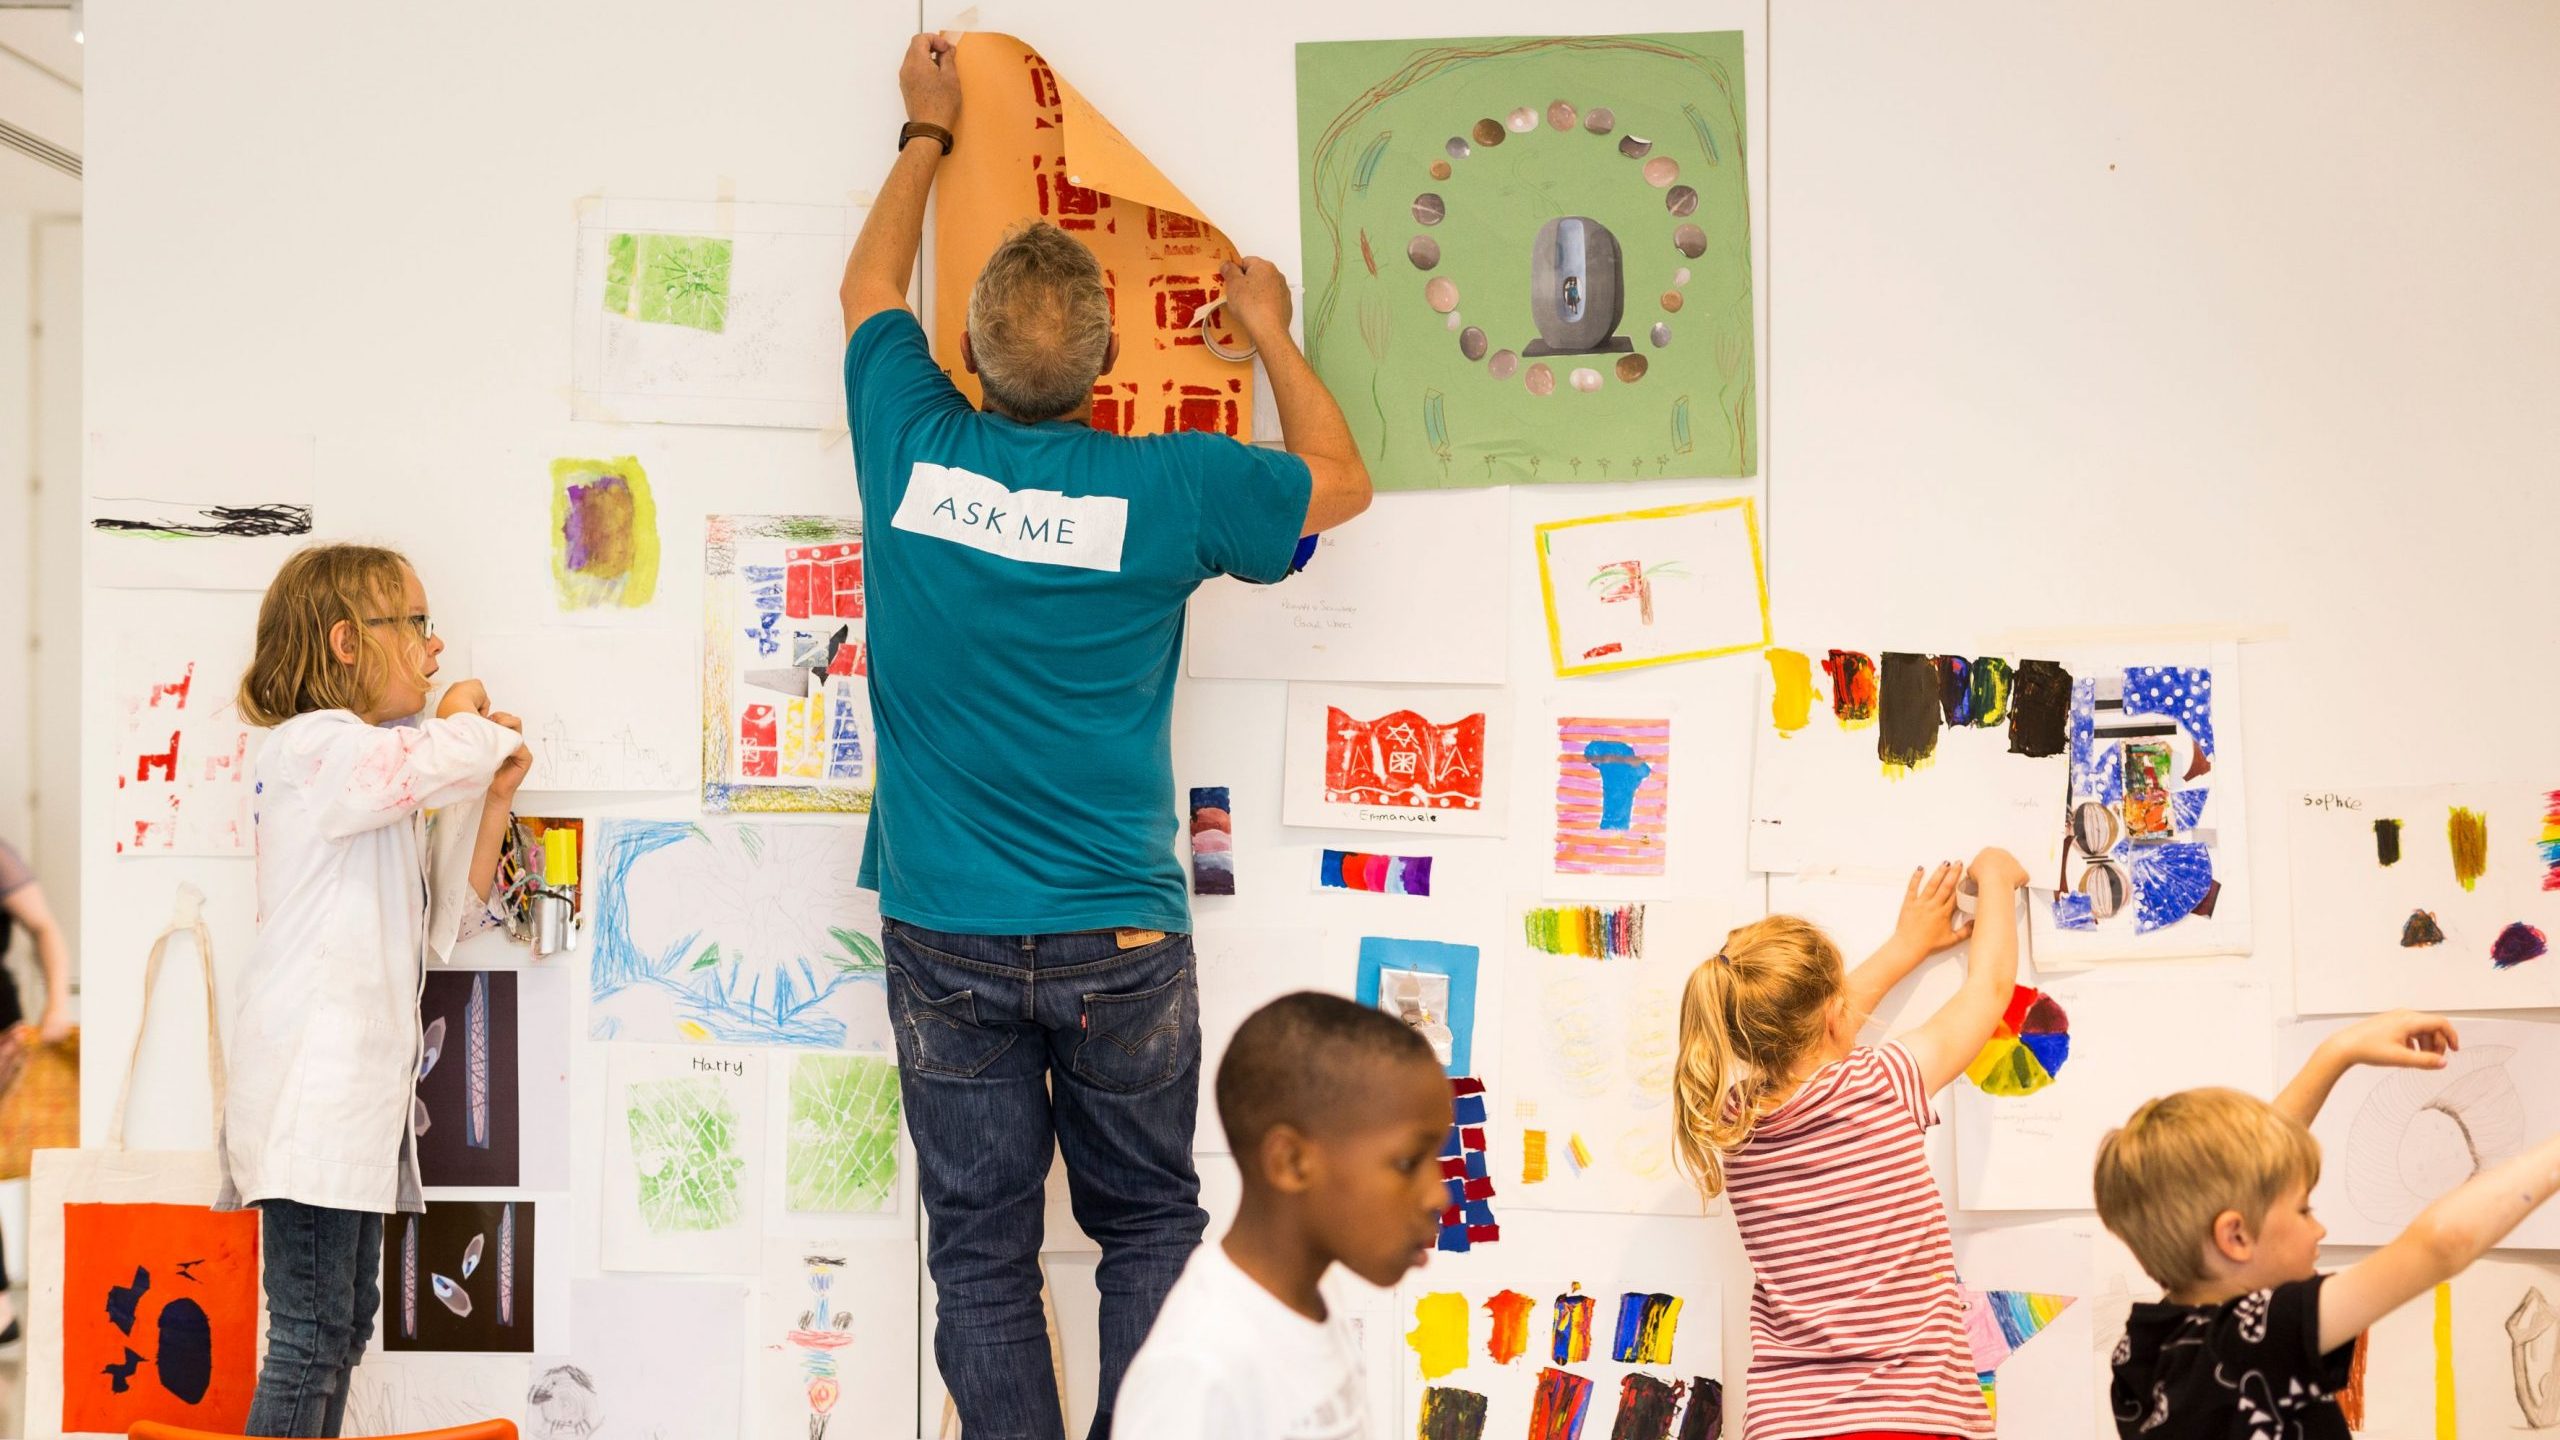 The Hepworth Wakefield is participating in the summer schools programme this year